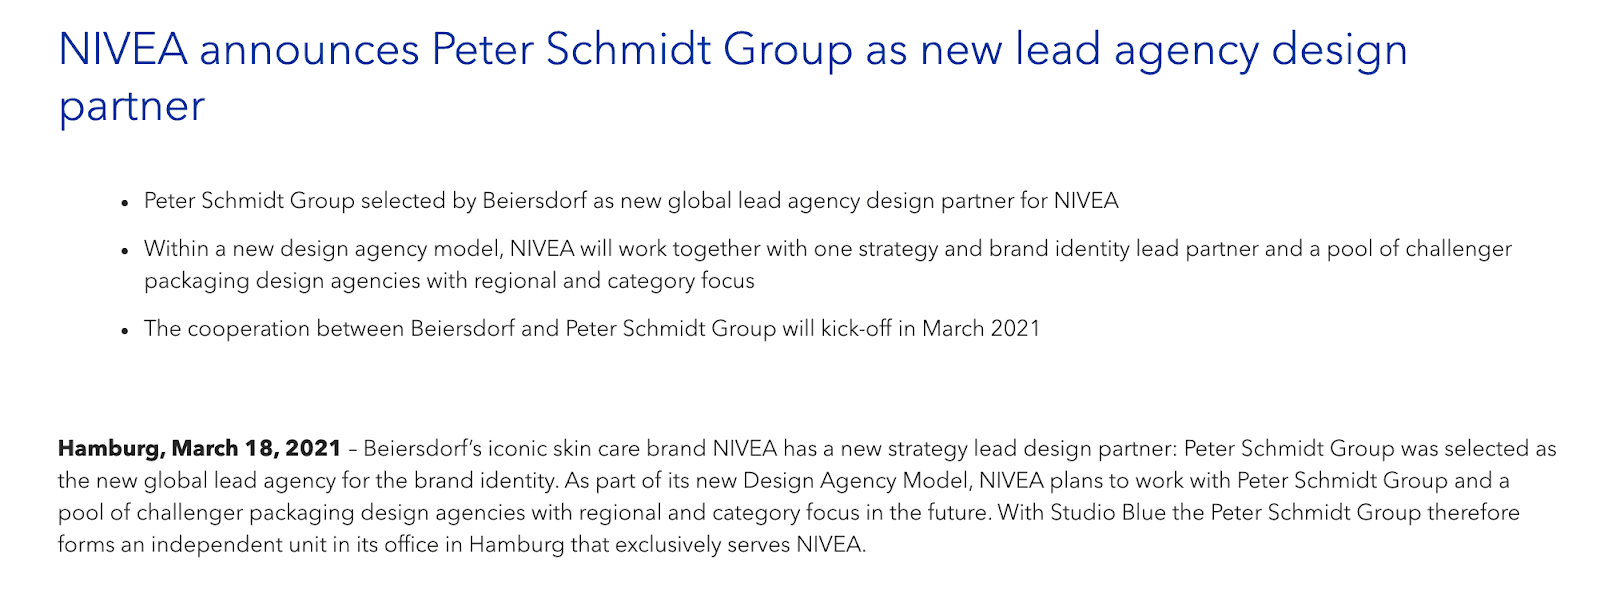 Press release example from NIVEA. 